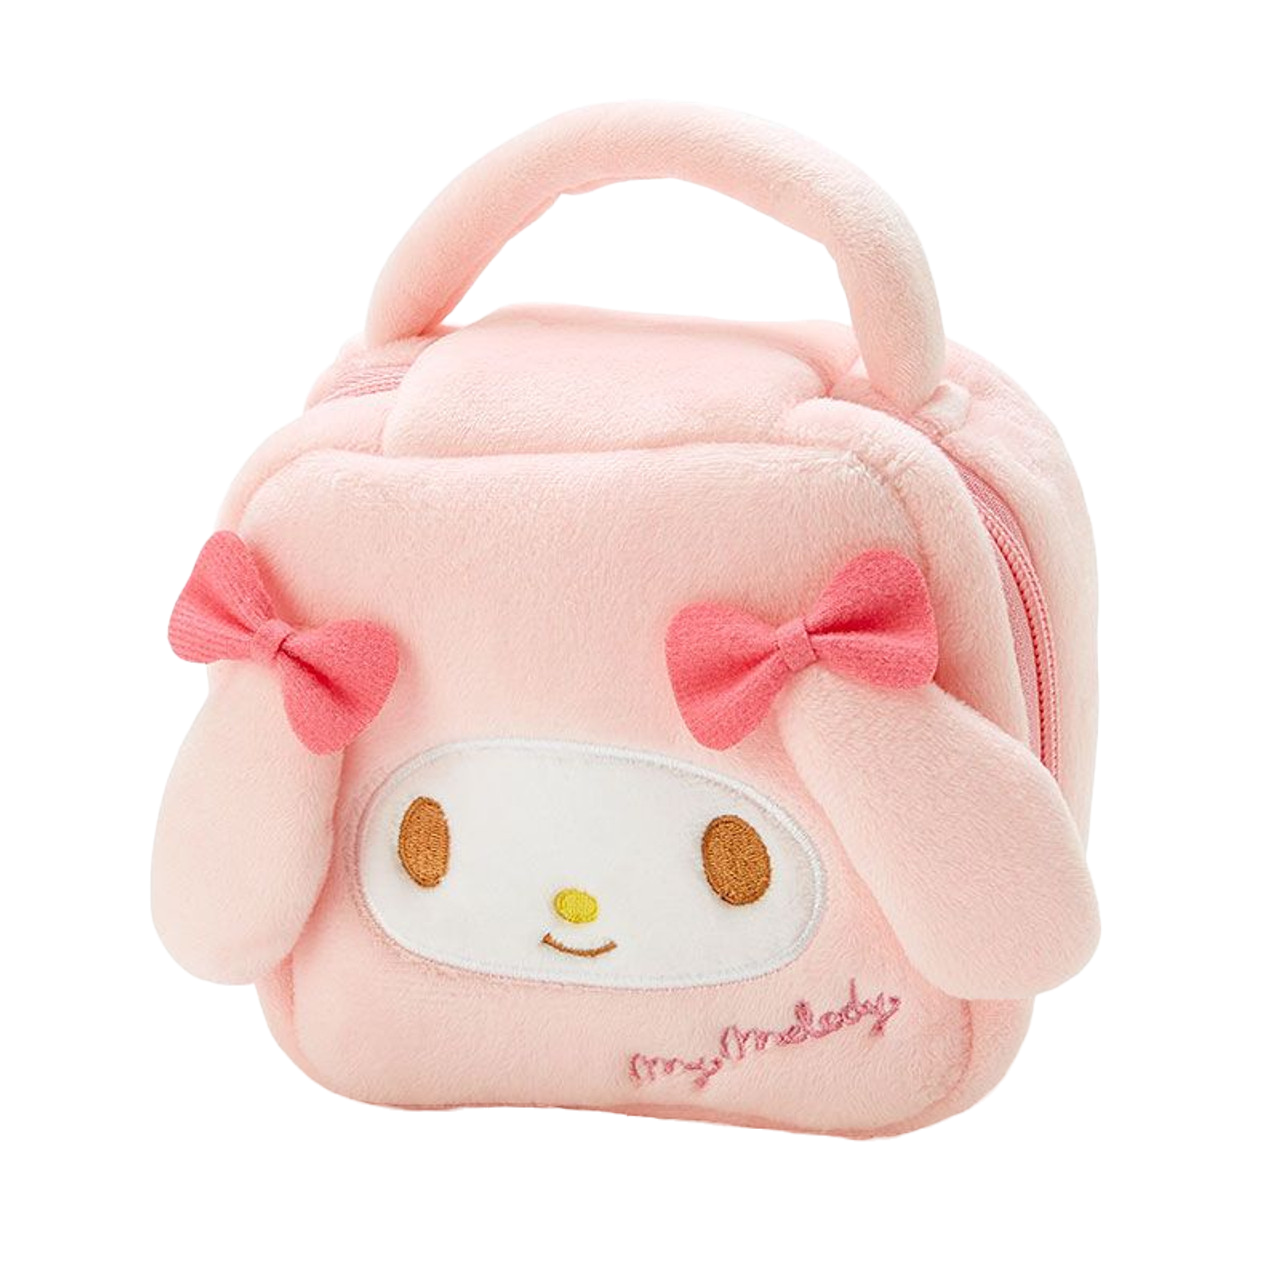 Sanrio Original - My Melody Face Shaped Pouch (512184)